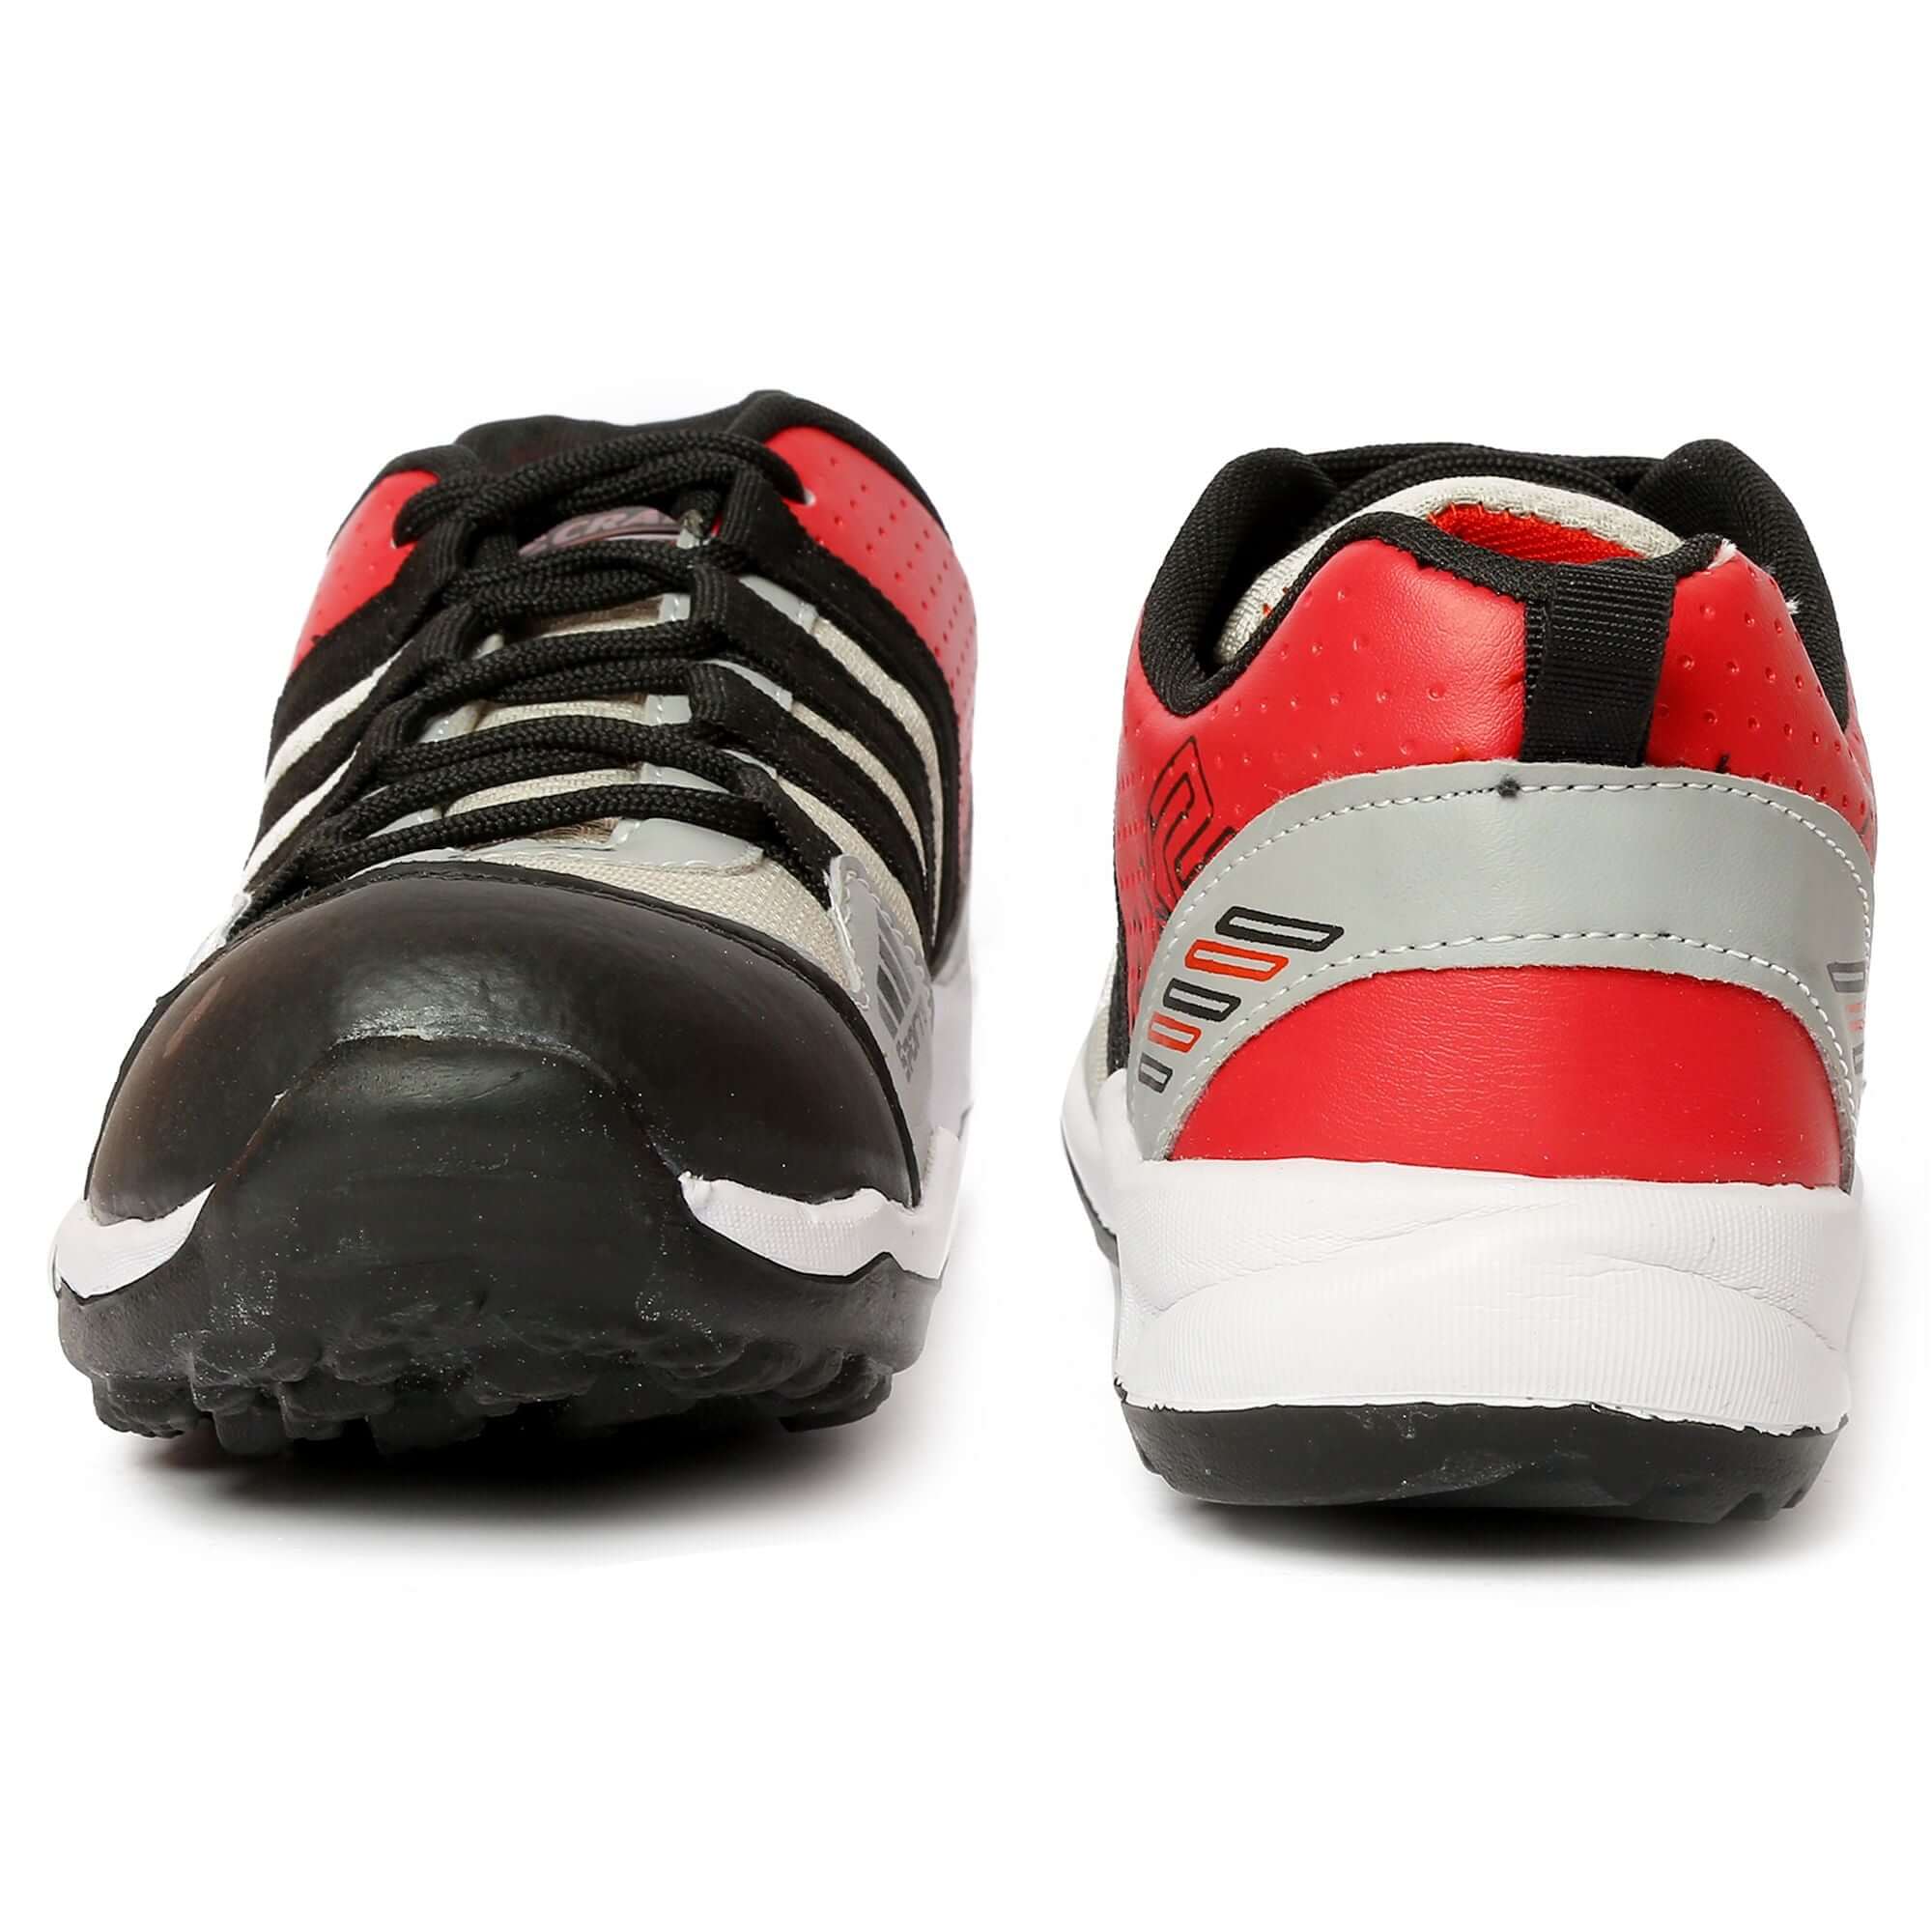 Speed Brand Men's Rider Laced Sports Shoes (Black/Red) :: RAJASHOES